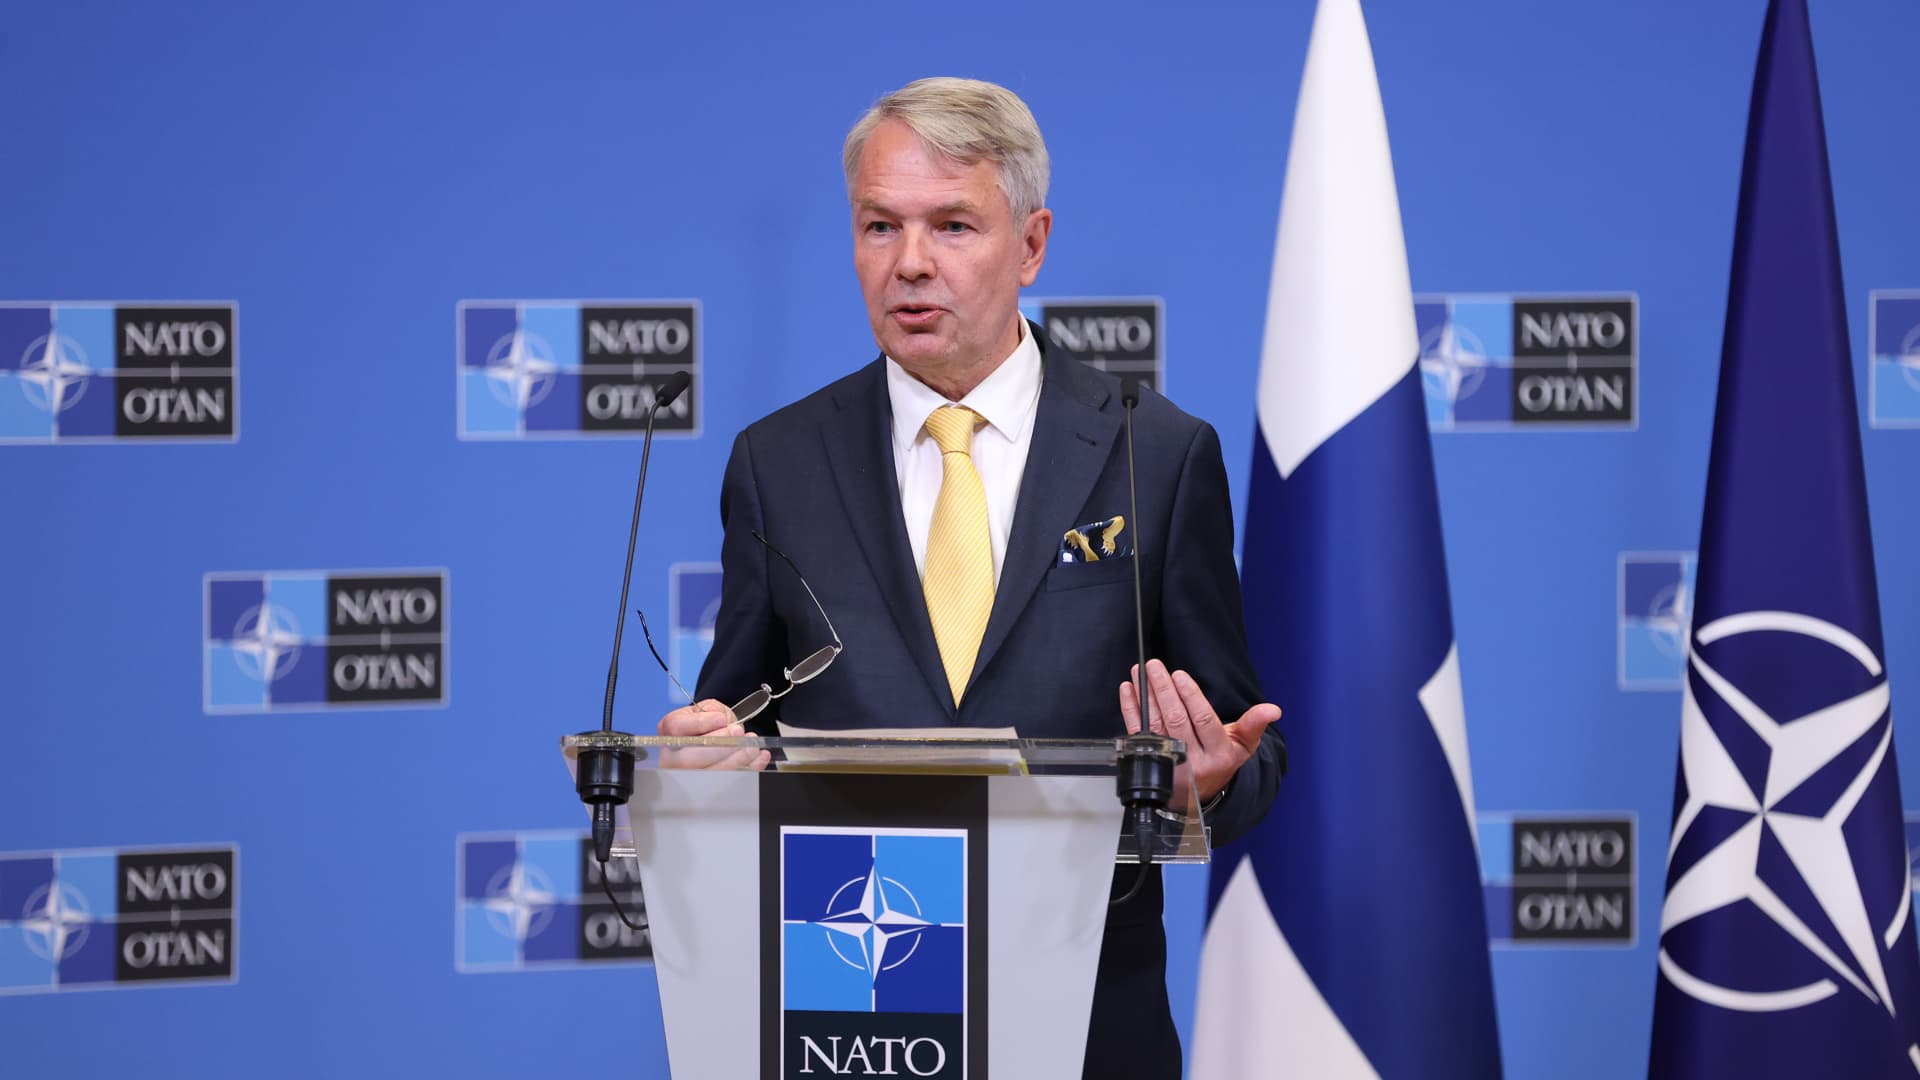 Finland and Sweden's plans to join NATO could be delayed after Turkey's devastating earthquake